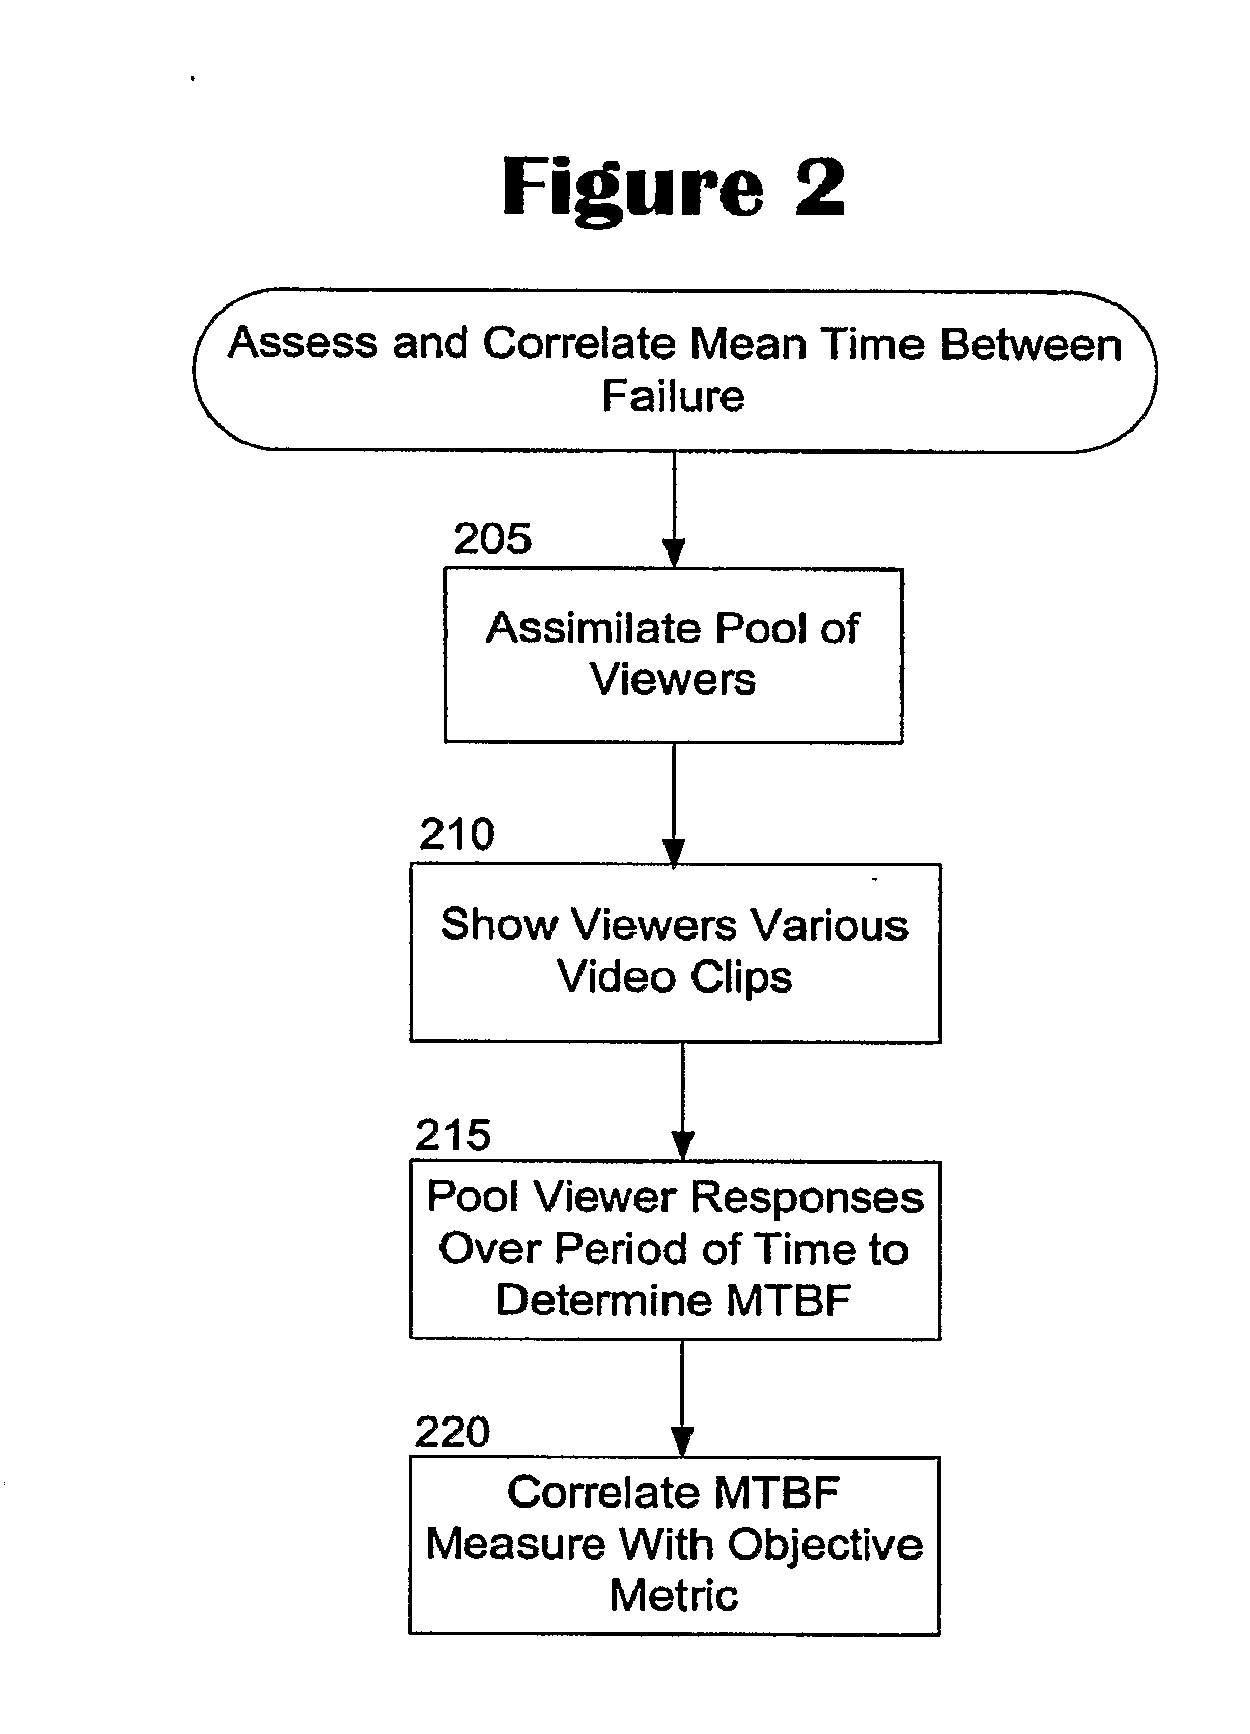 Automatic Video Quality Measurement System and Method Based on Spatial-Temporal Coherence Metrics